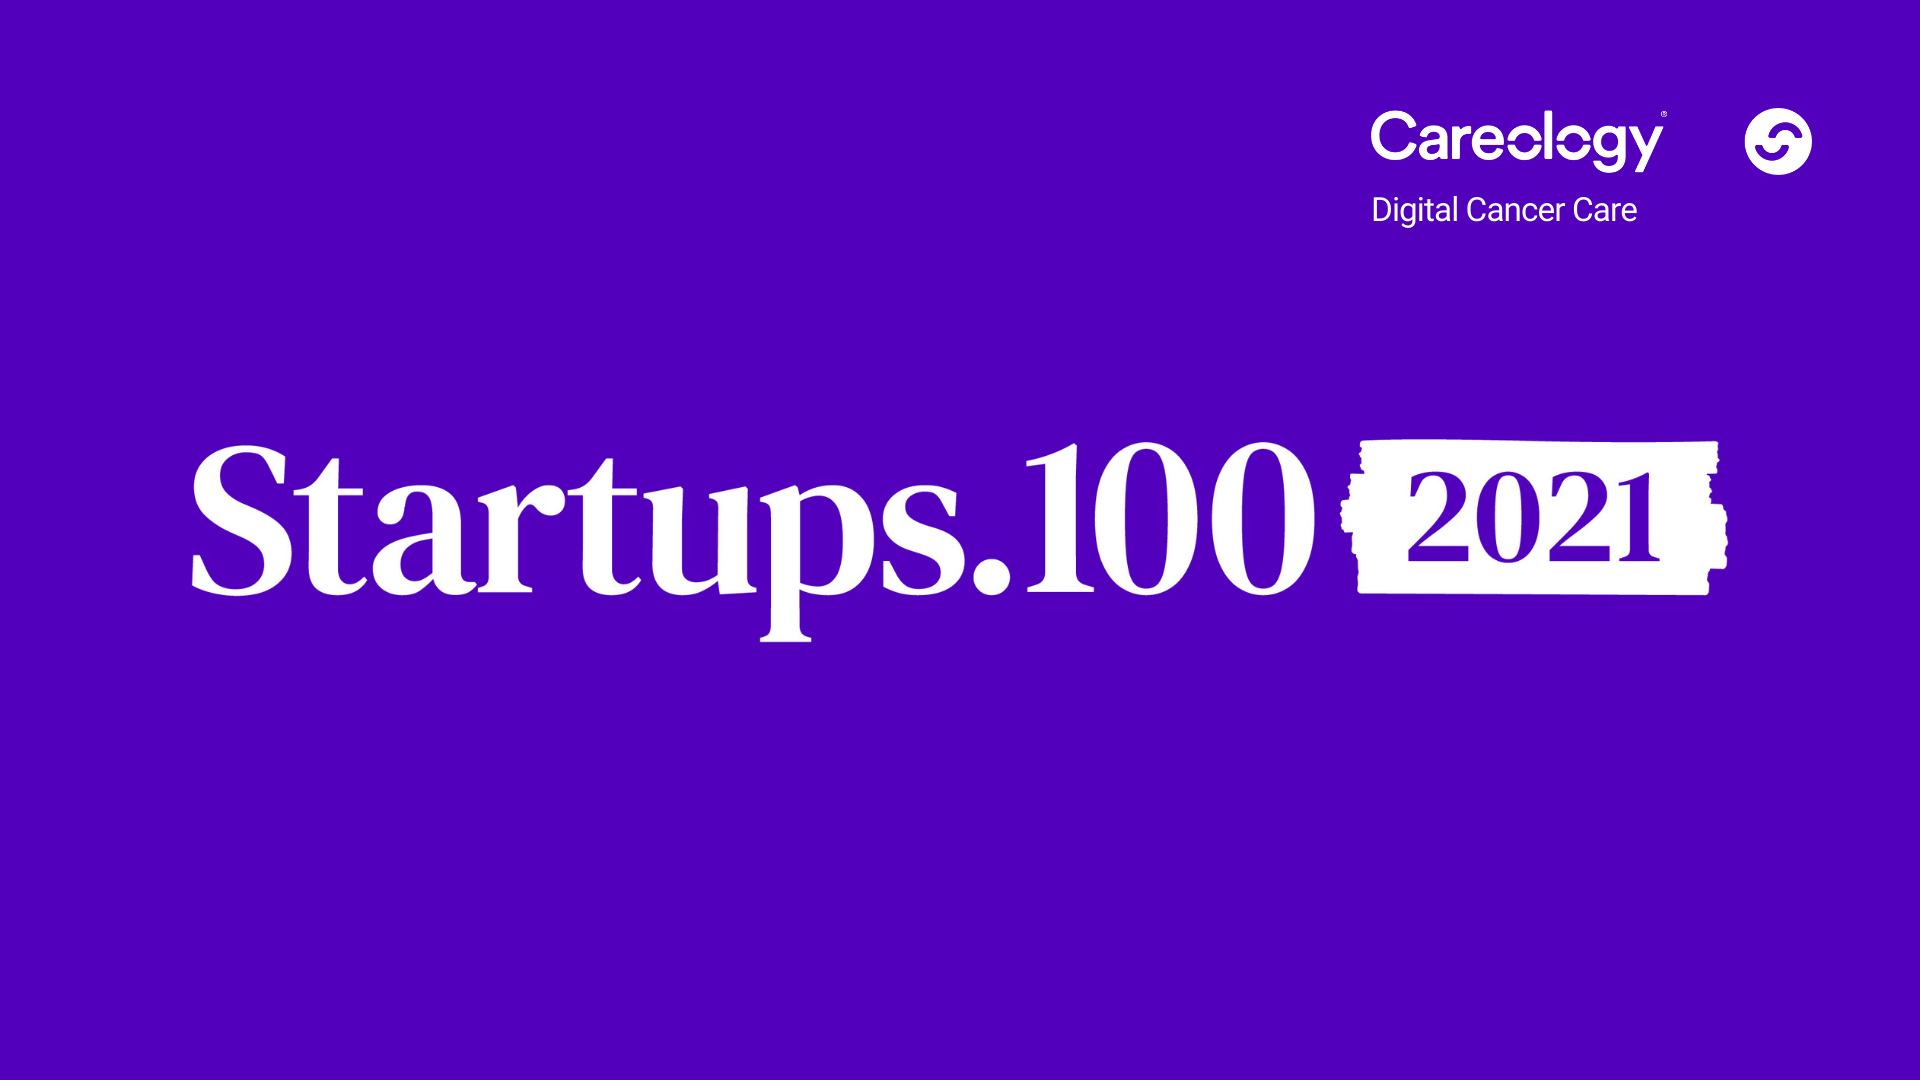 Careology named as one of the UK's Top 100 Startups in 2021